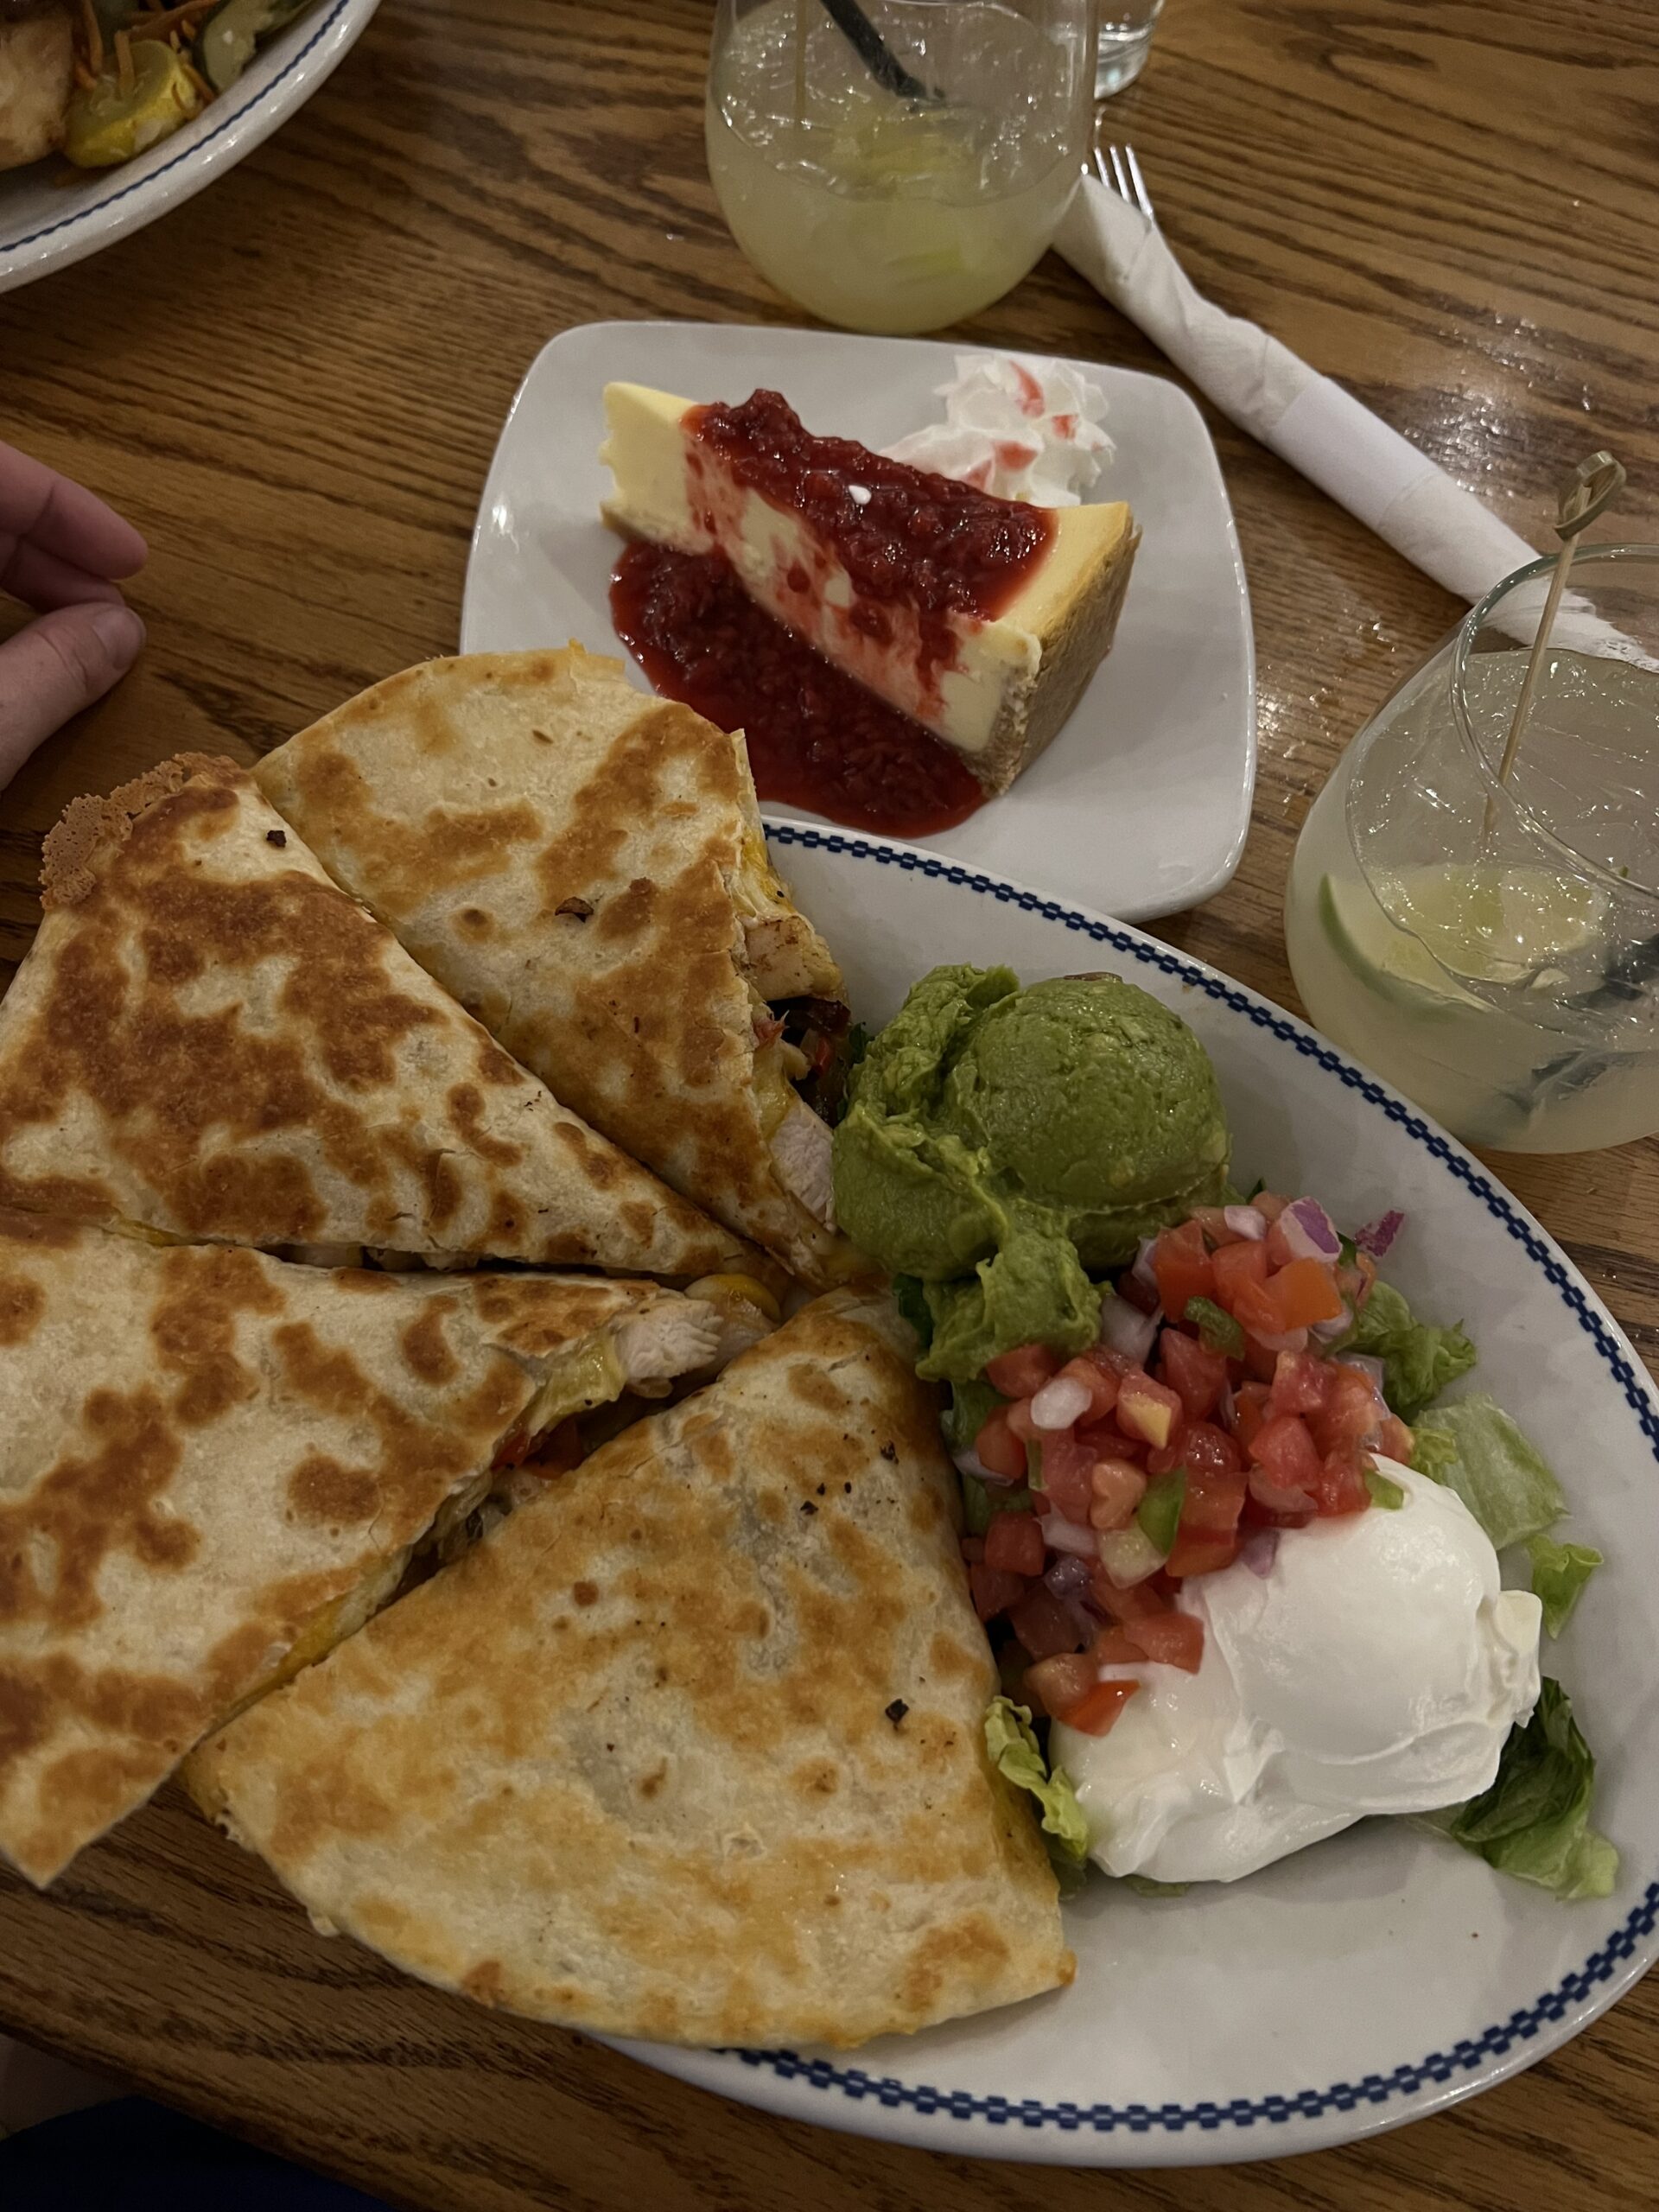 Cheesecake, a drink, and a quesadilla